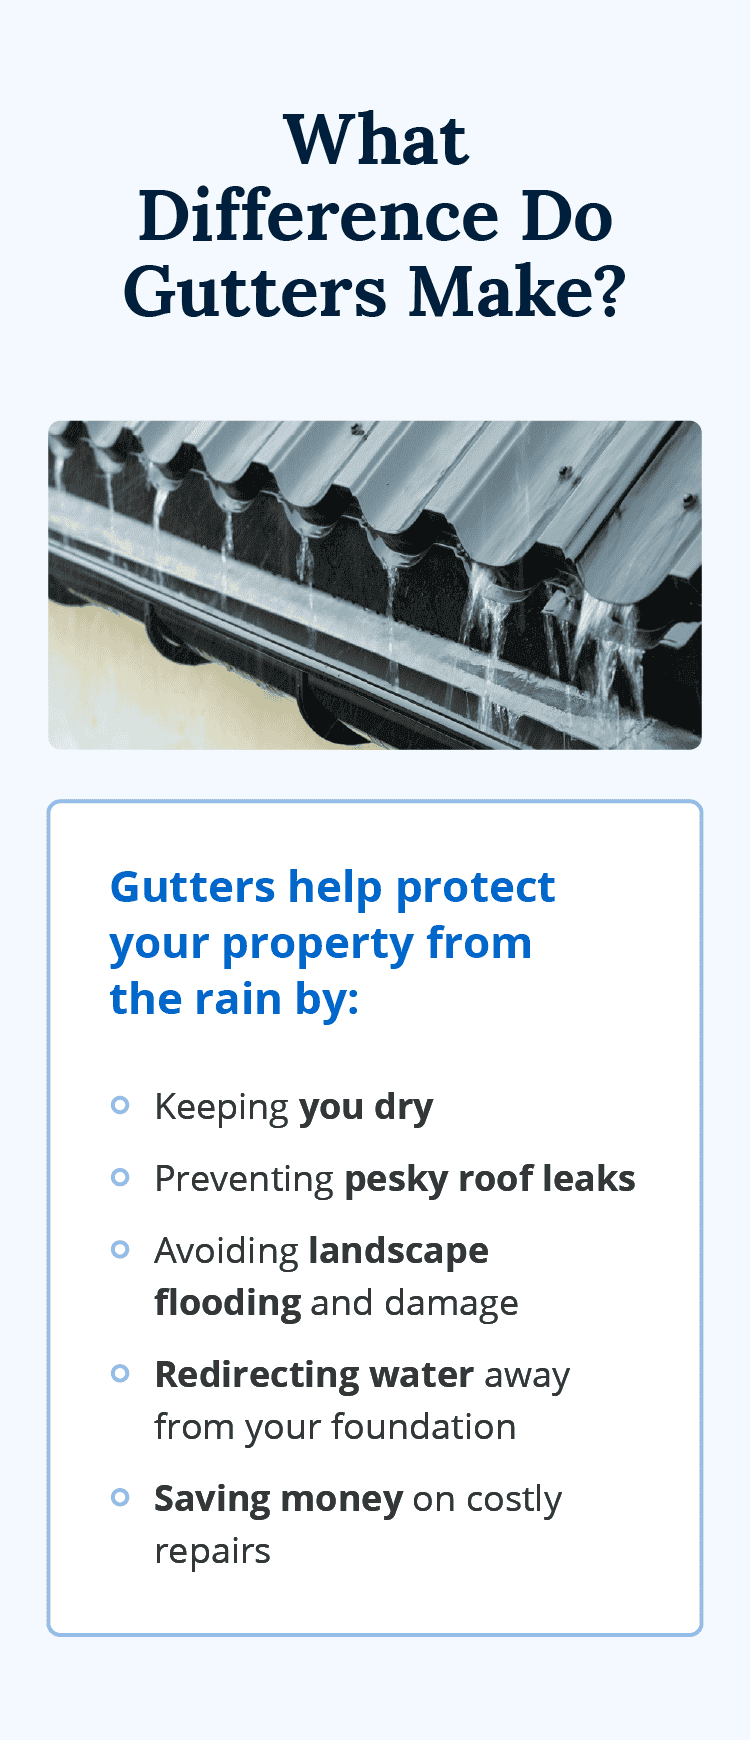 Image of a gutter with key benefits for you and your property.